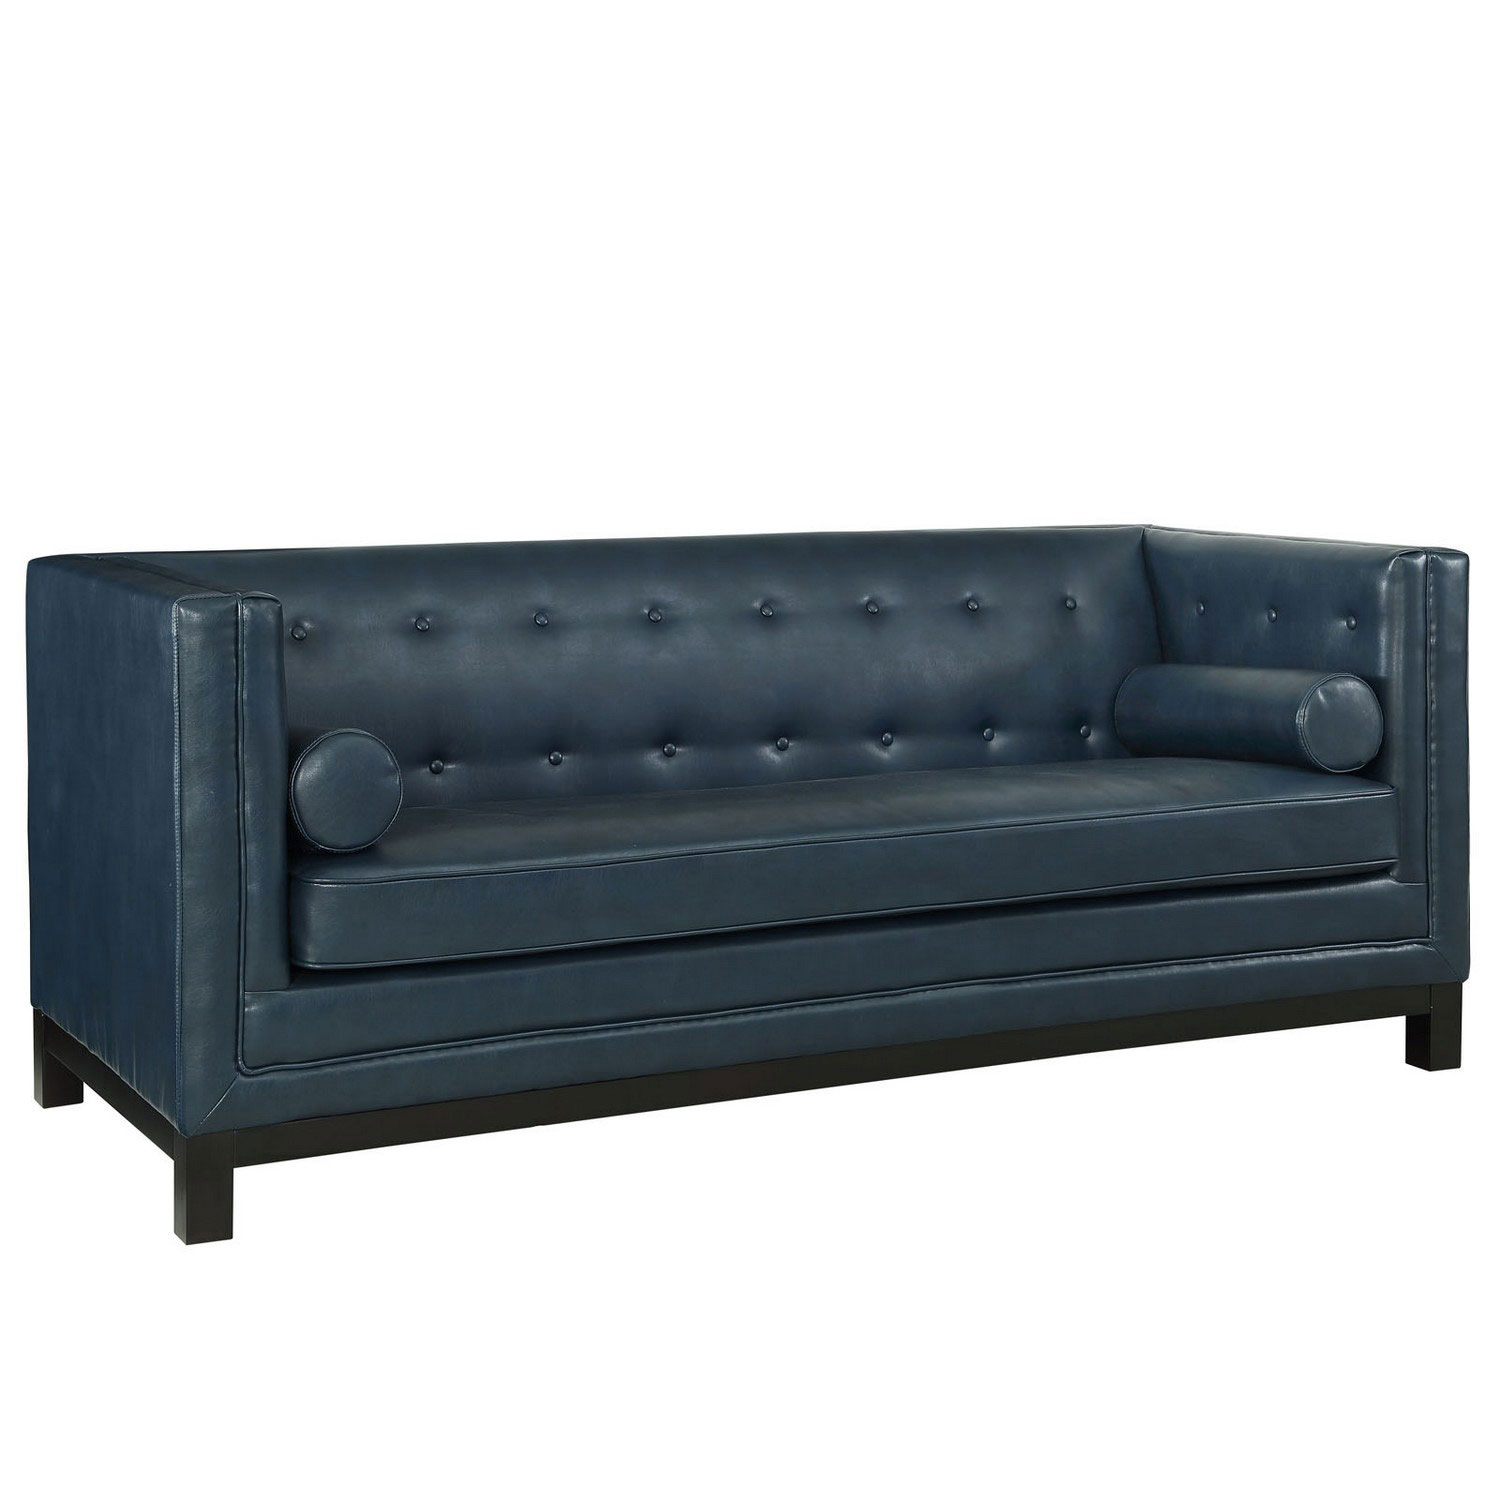 Modway Imperial Sofa - Blue